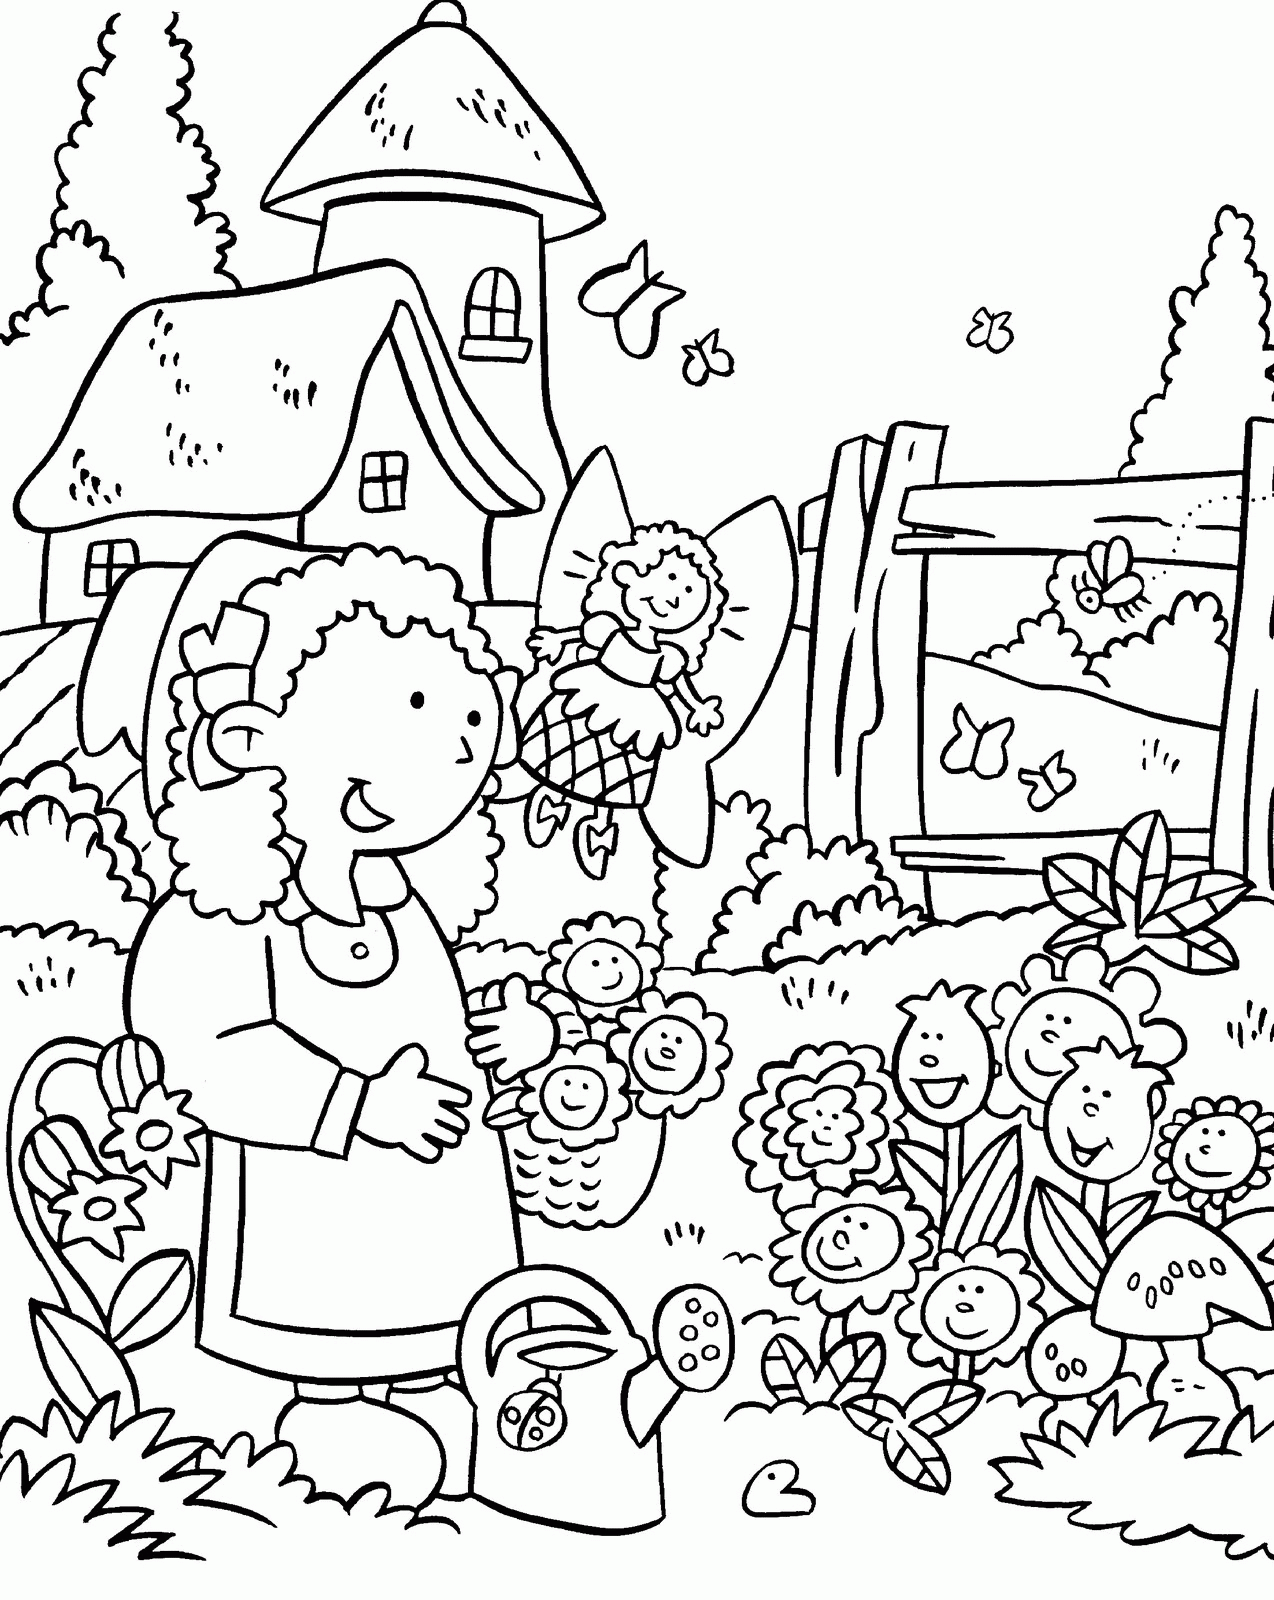 flower garden coloring pages printable - high quality coloring pages